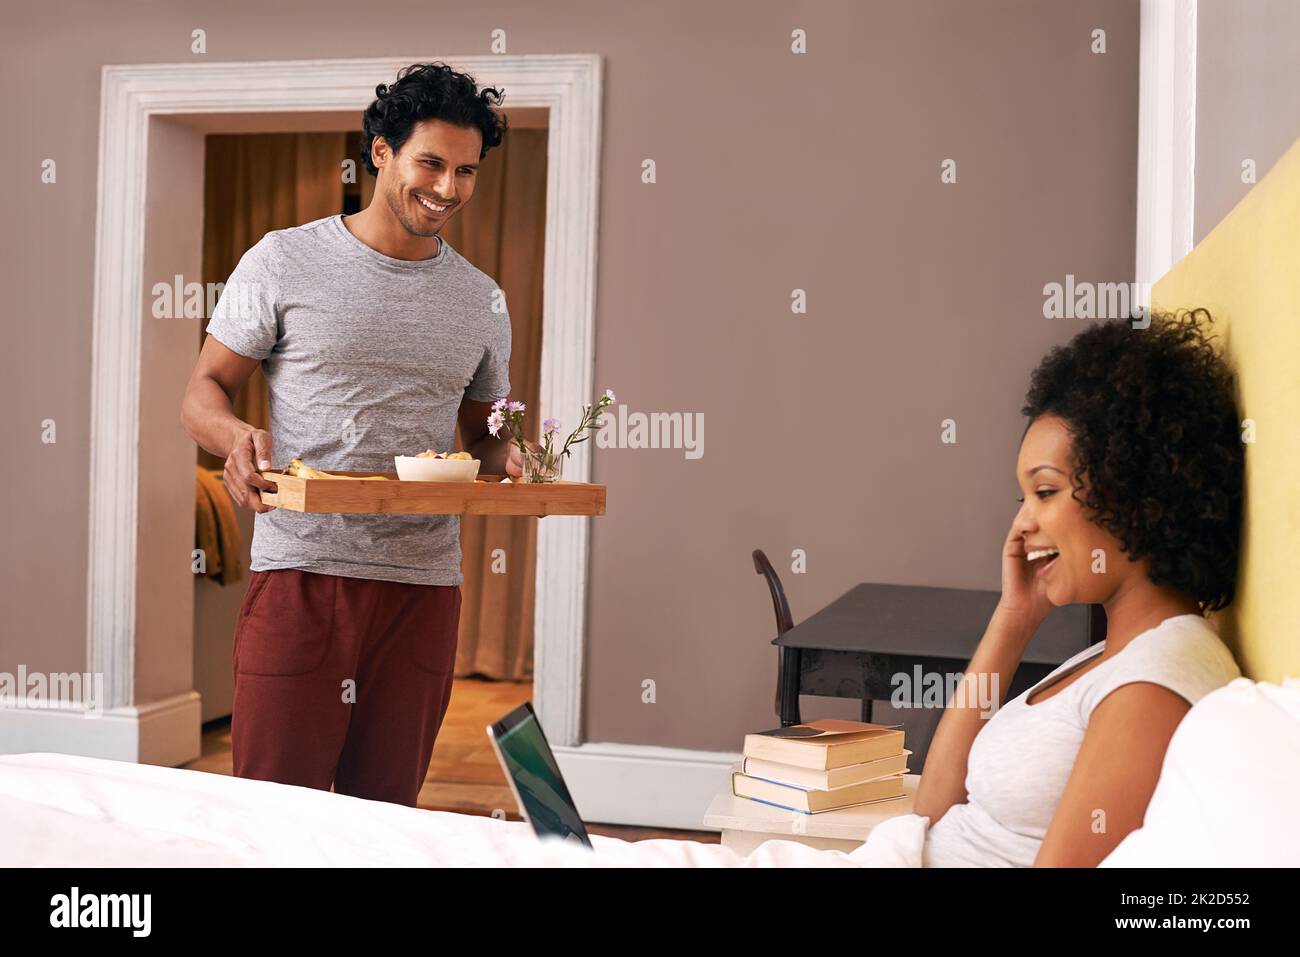 Surprising her with breakfast. A young man bringing his girlfriend breakfast in bed. Stock Photo